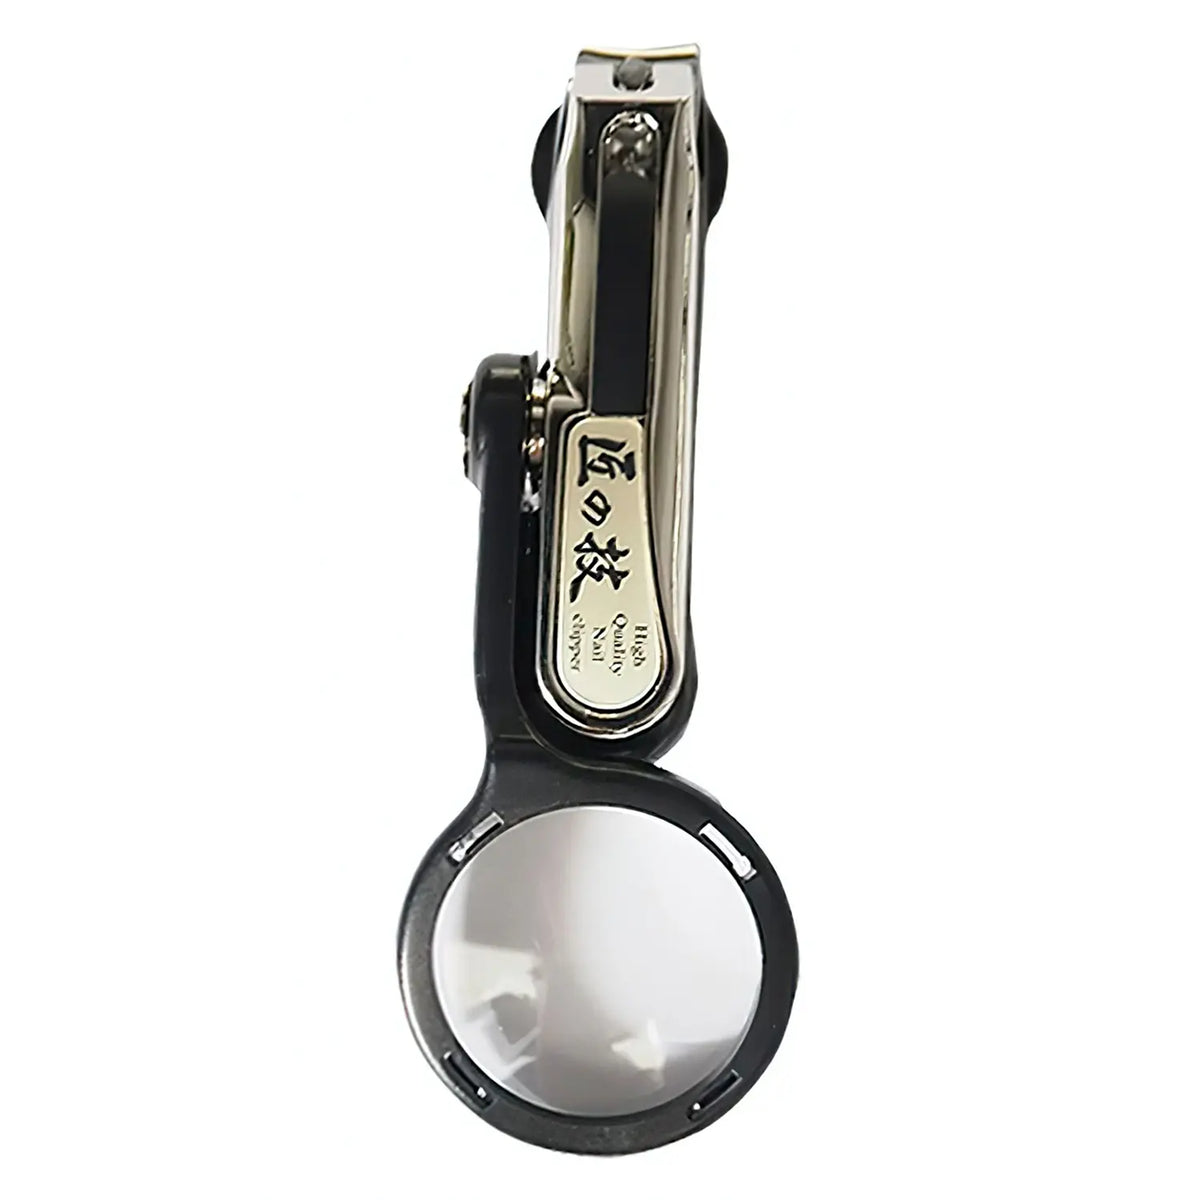 Green Bell Takuminowaza Carbon Steel Nail Clippers with Magnifier and Storage Bag Black